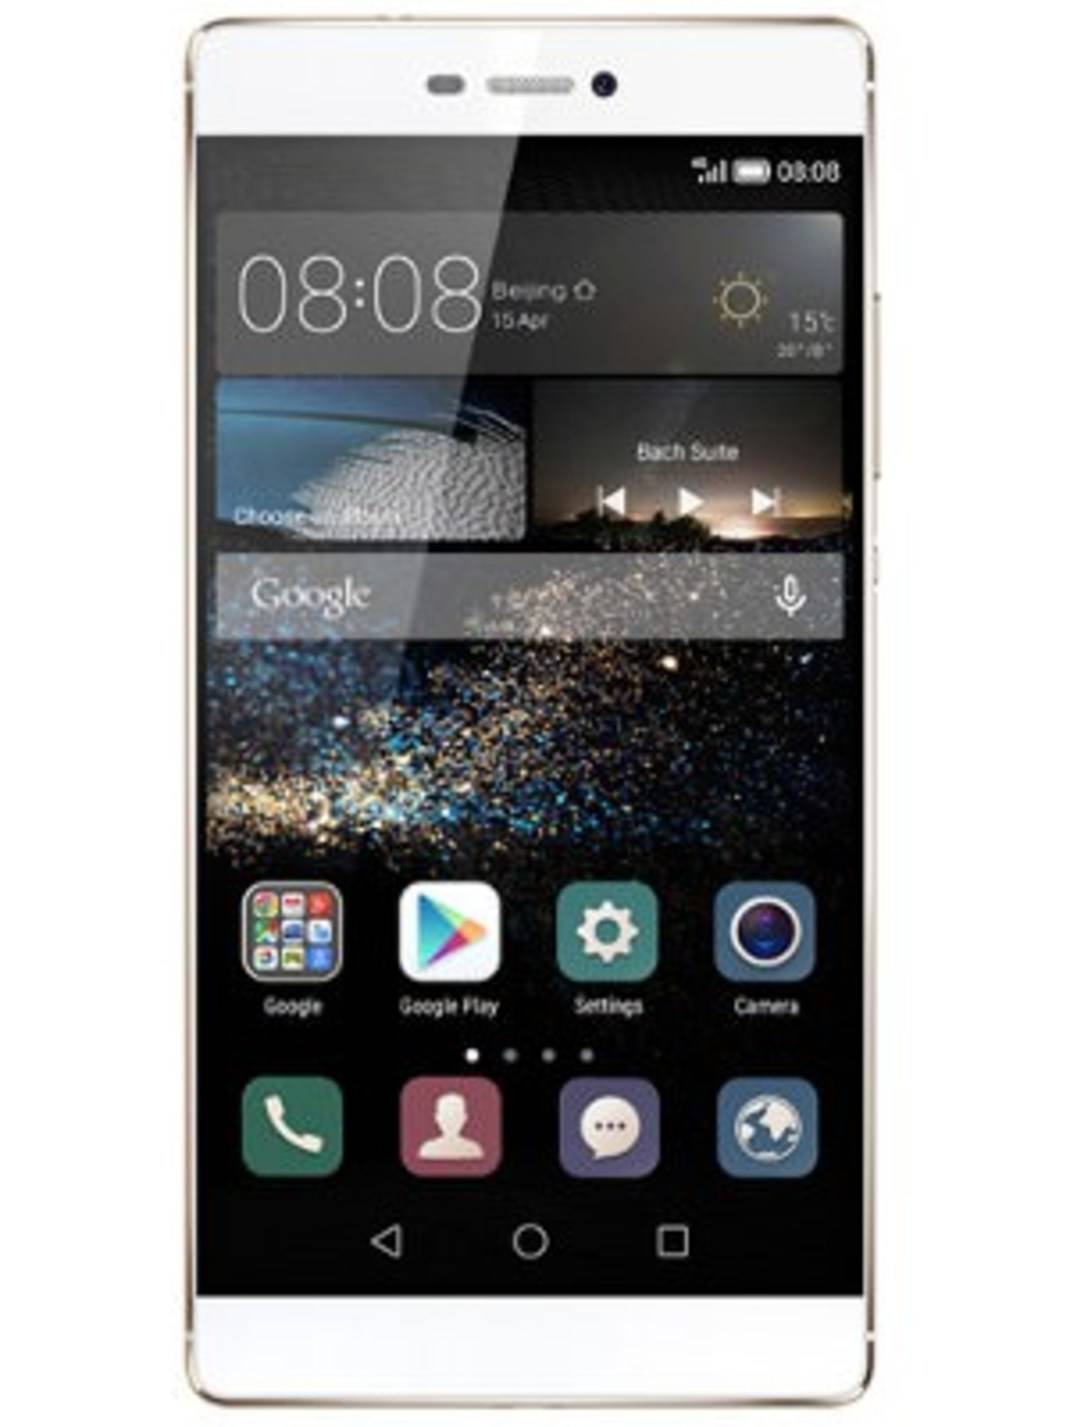 Huawei Ascend P8 vs Huawei P8 Lite: Specifications, Price | Gadgets Now